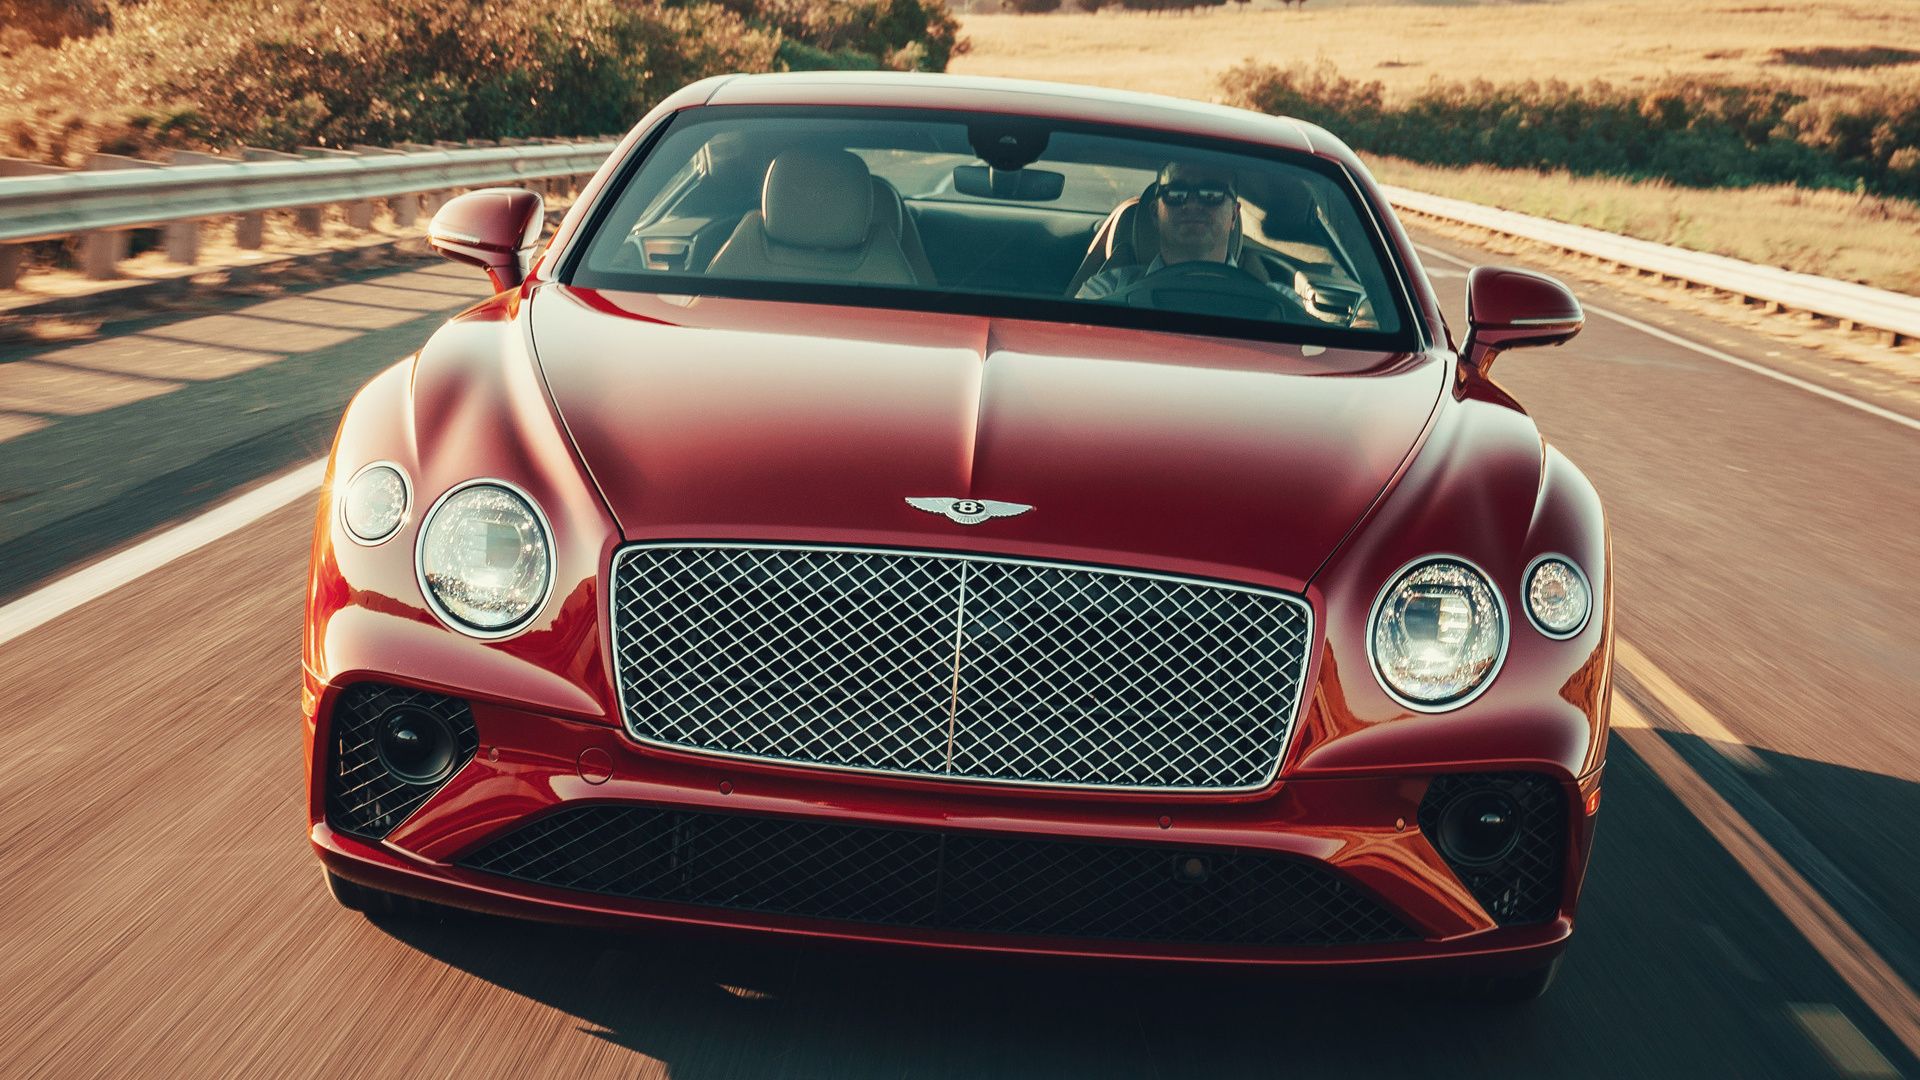 Bentley Continental GT V8 (US) and HD Image